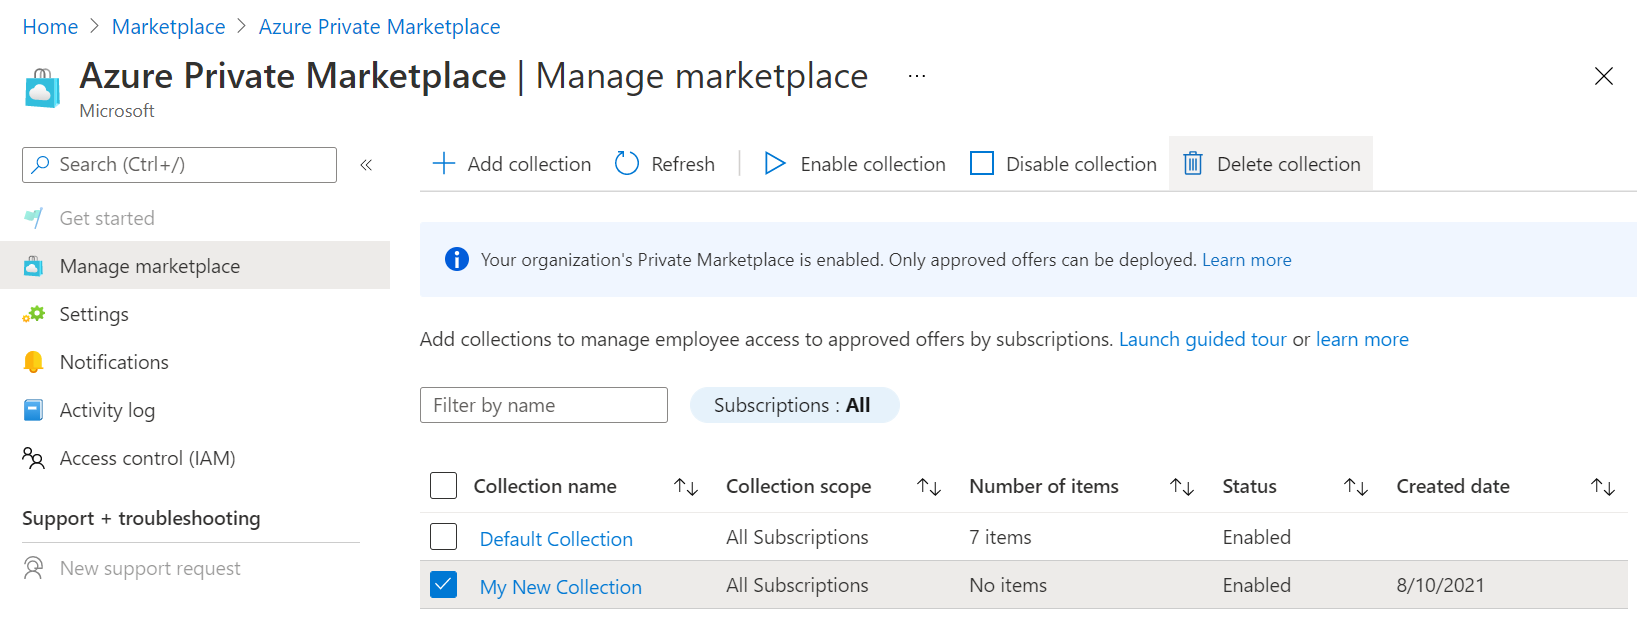 Shows the Private Azure Marketplace screen with the 'Delete collection' button highlighted.